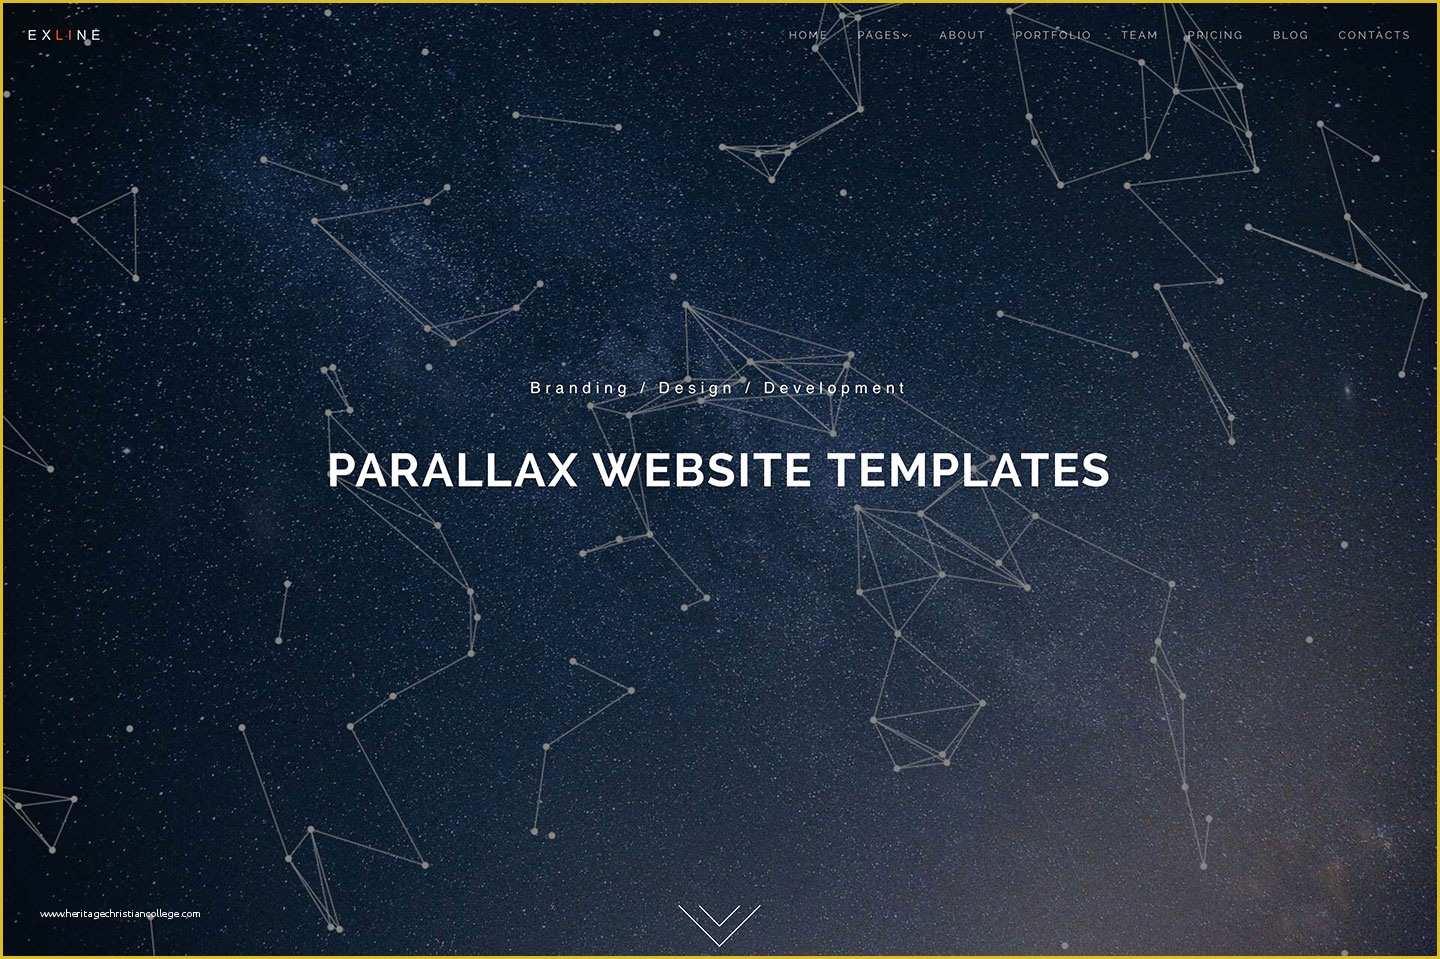 Bootstrap Parallax Scrolling Template Free Of 31 Minimal HTML5 Css3 Parallax Website Templates 2019